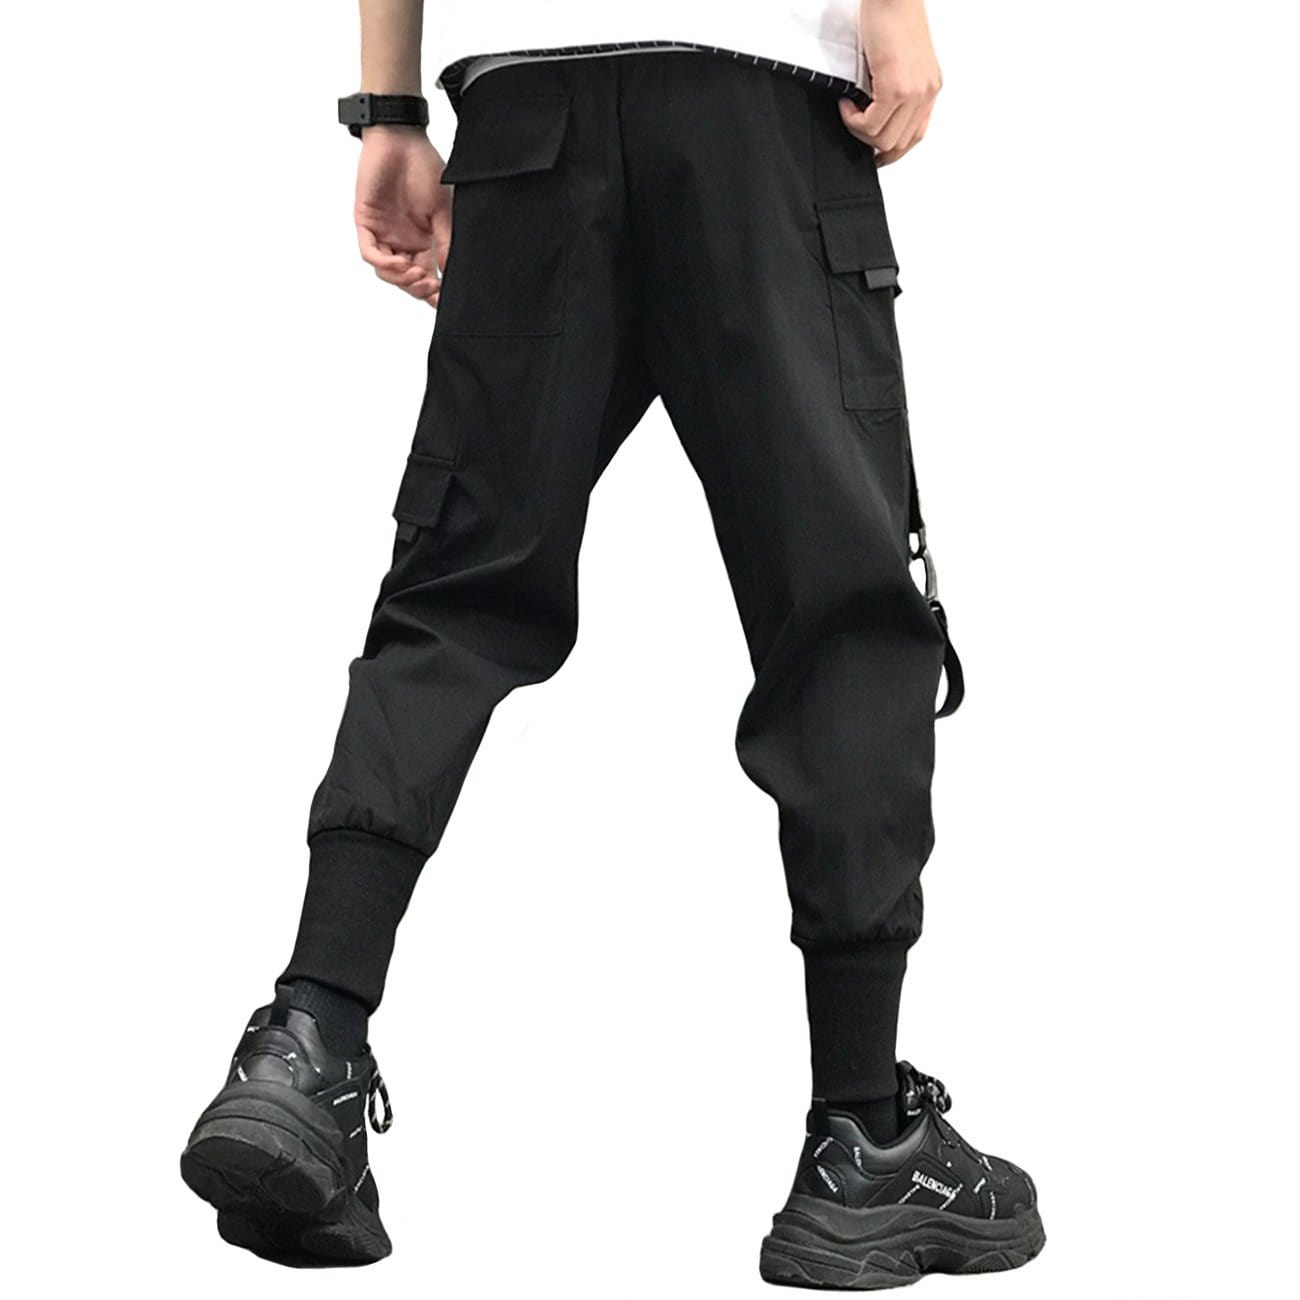 TO Combat Ribbons Cargo Pants